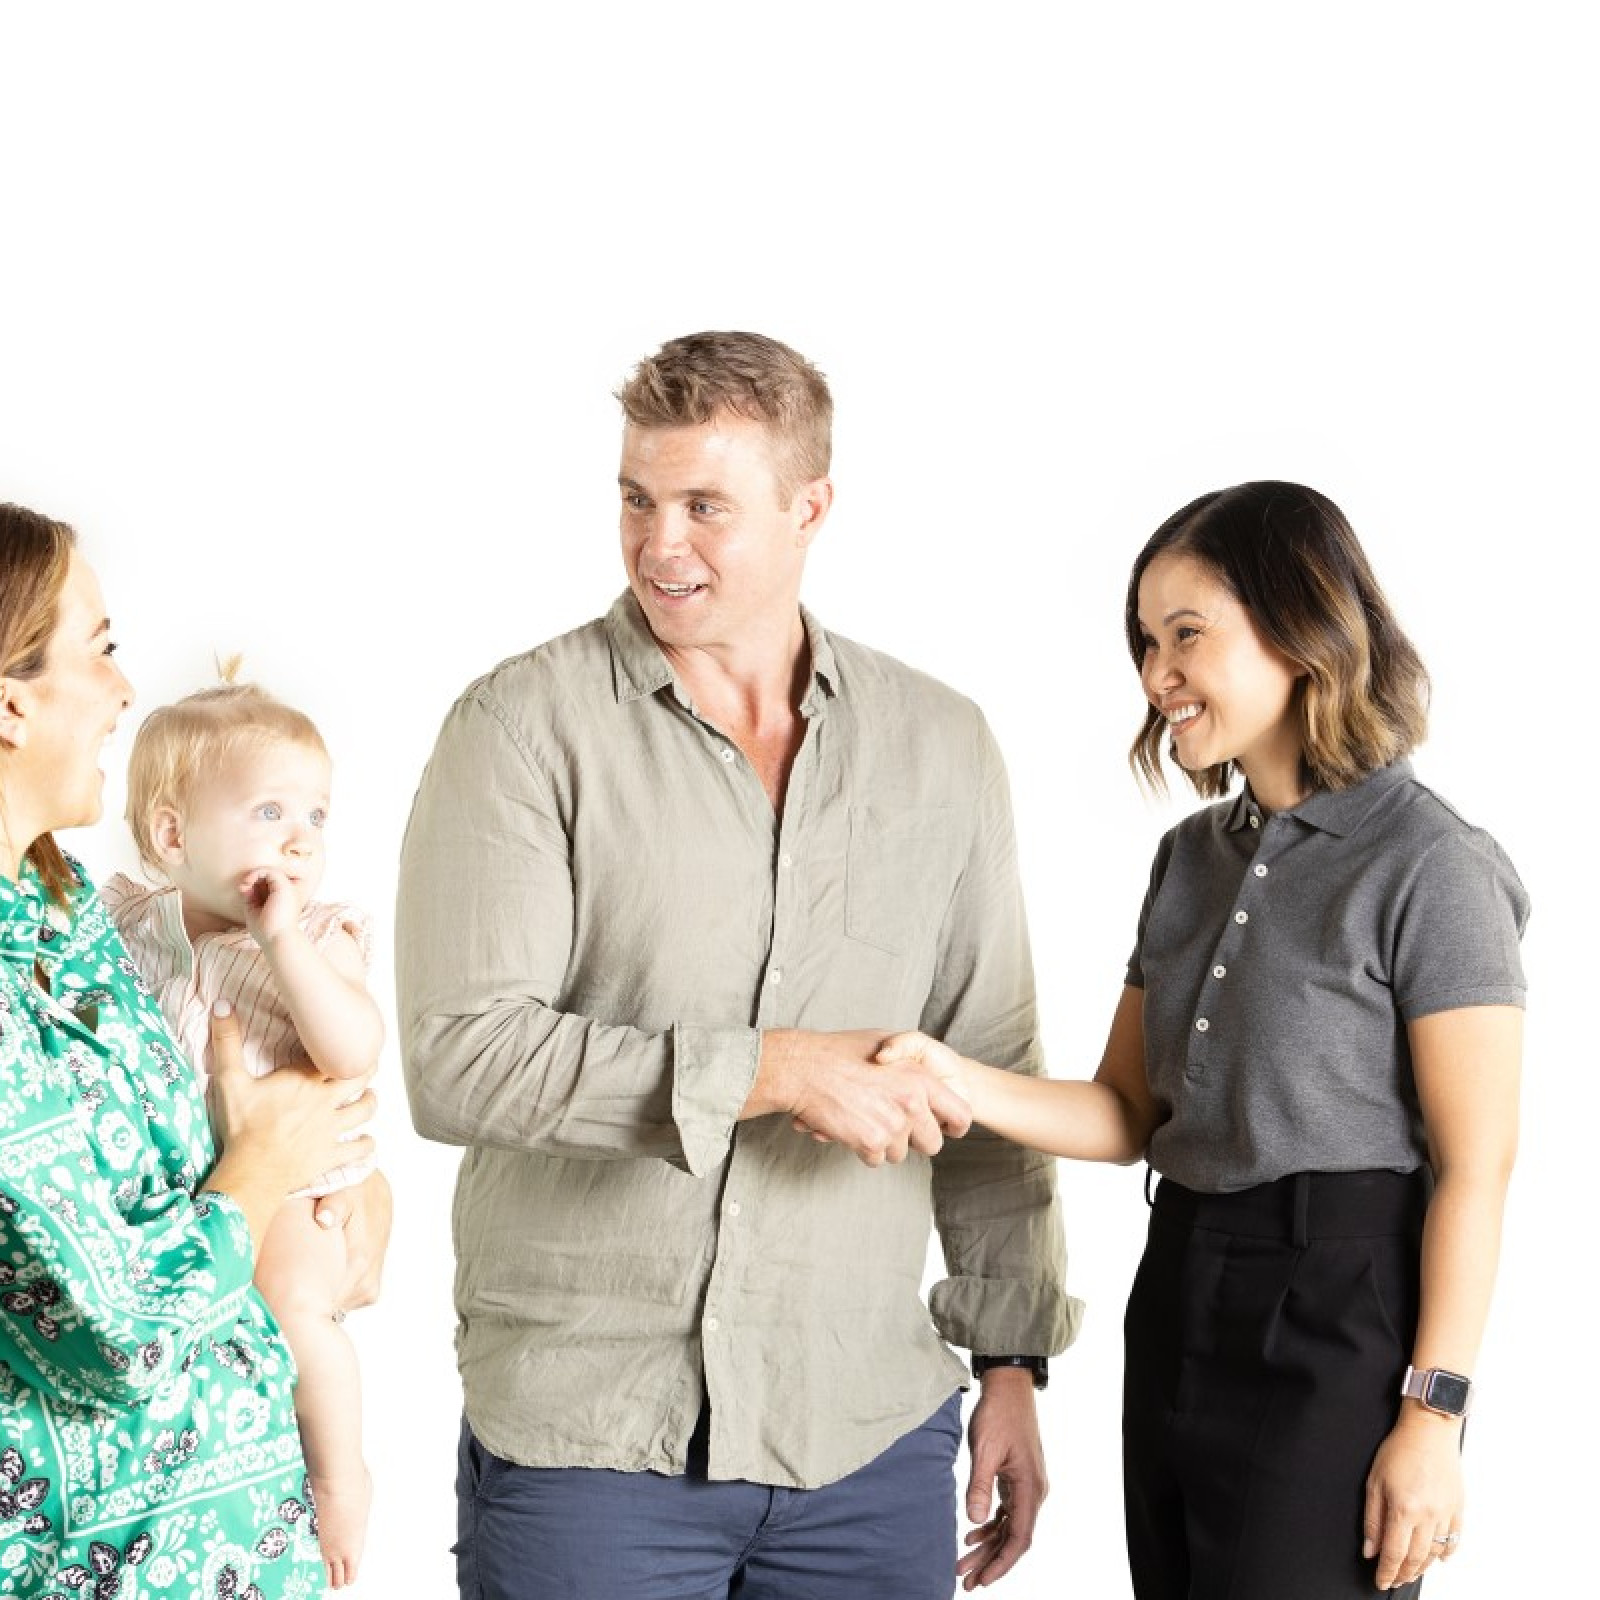 A couple with a baby shake hands with a woman in a grey polo shirt